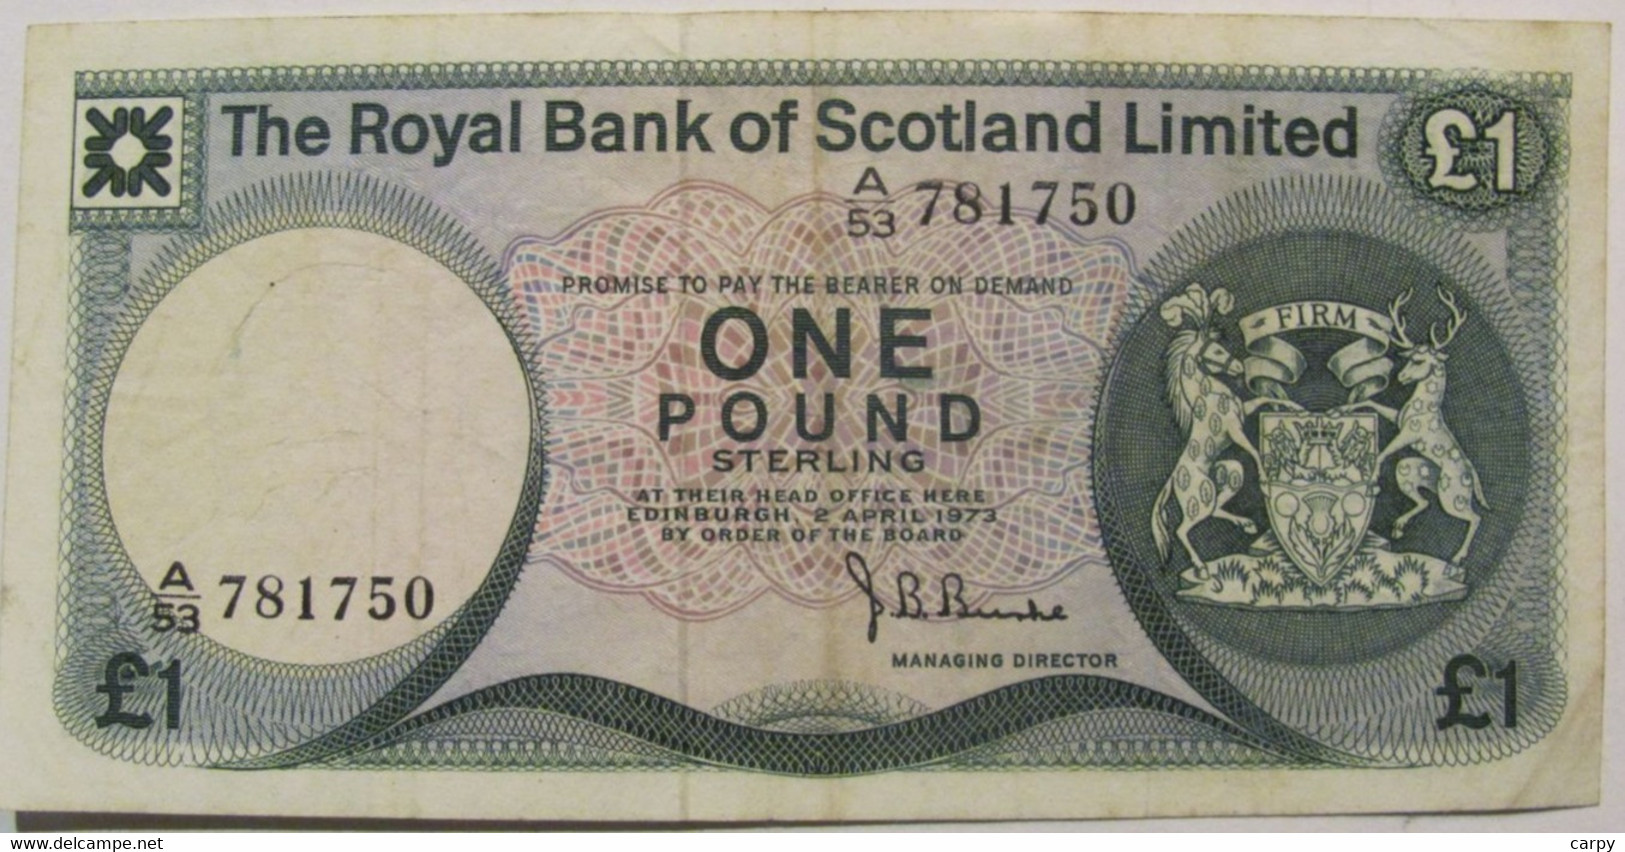 Pound 02 - Nd Of April 1973 / The Royal BANK Of SCOTLAND Limited / Circulated But Nice Looking - 1 Pound